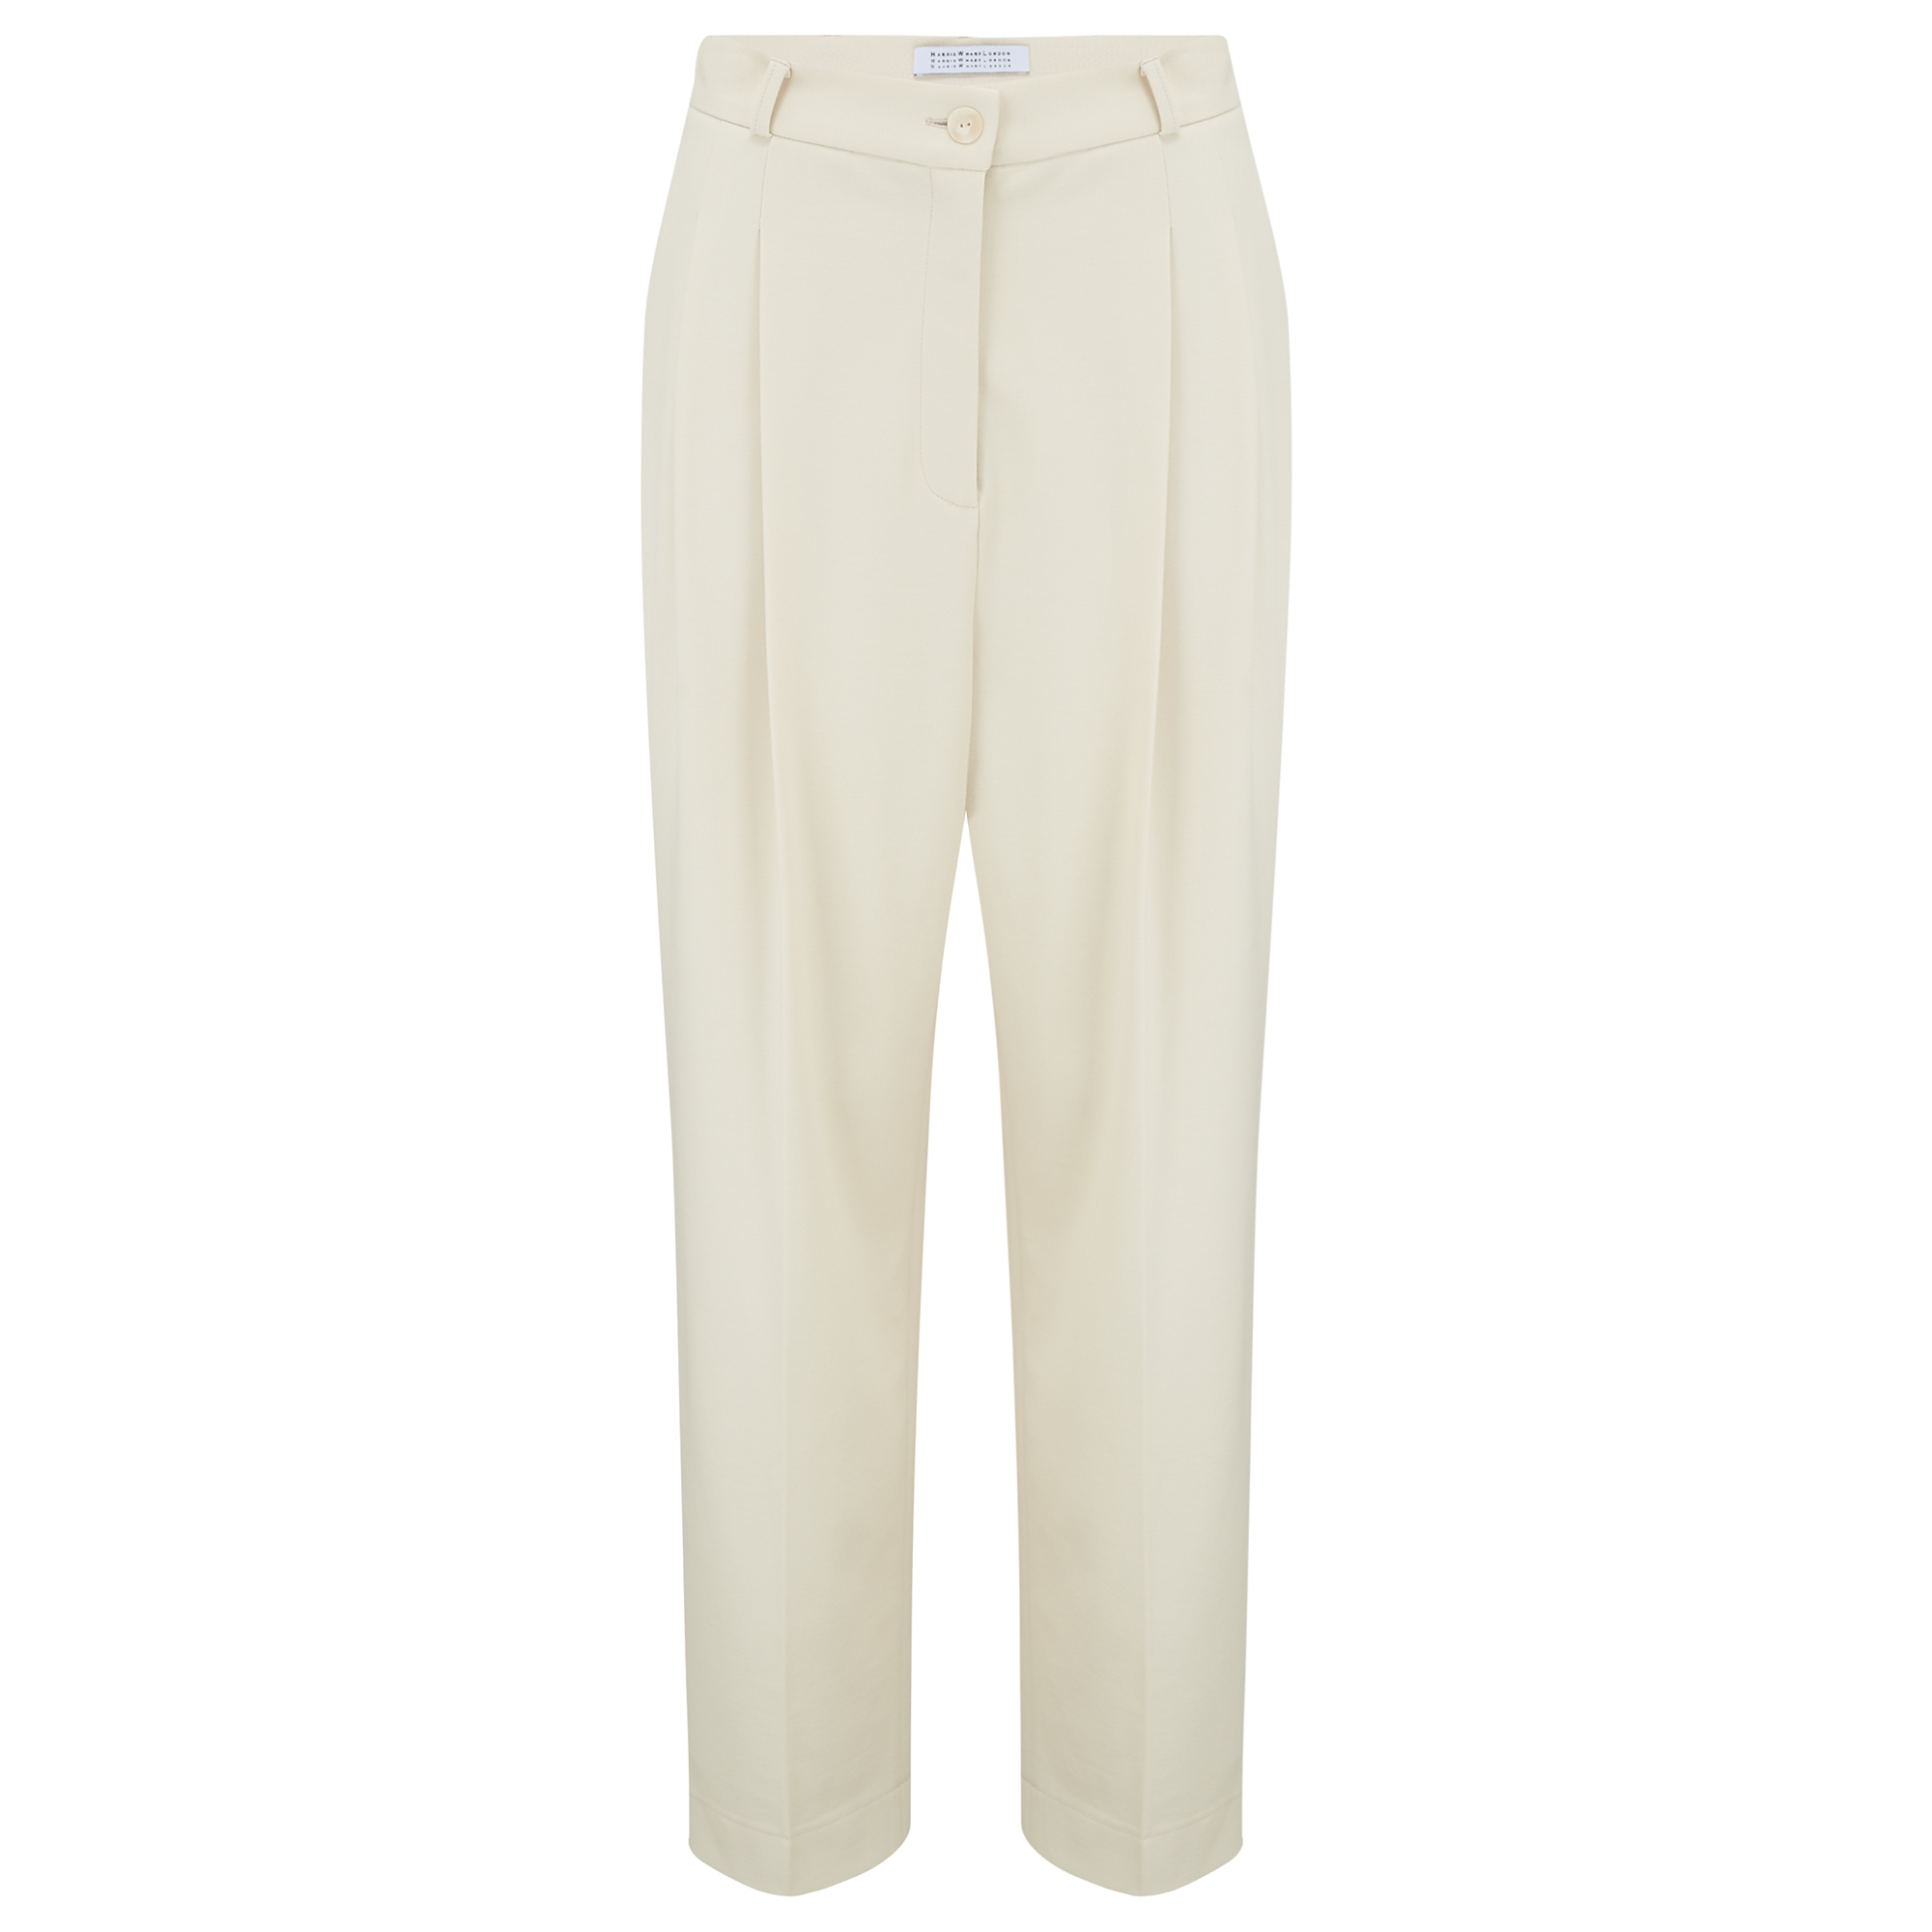 Harris Wharf Pleated Trousers Techno Viscose in Ivory